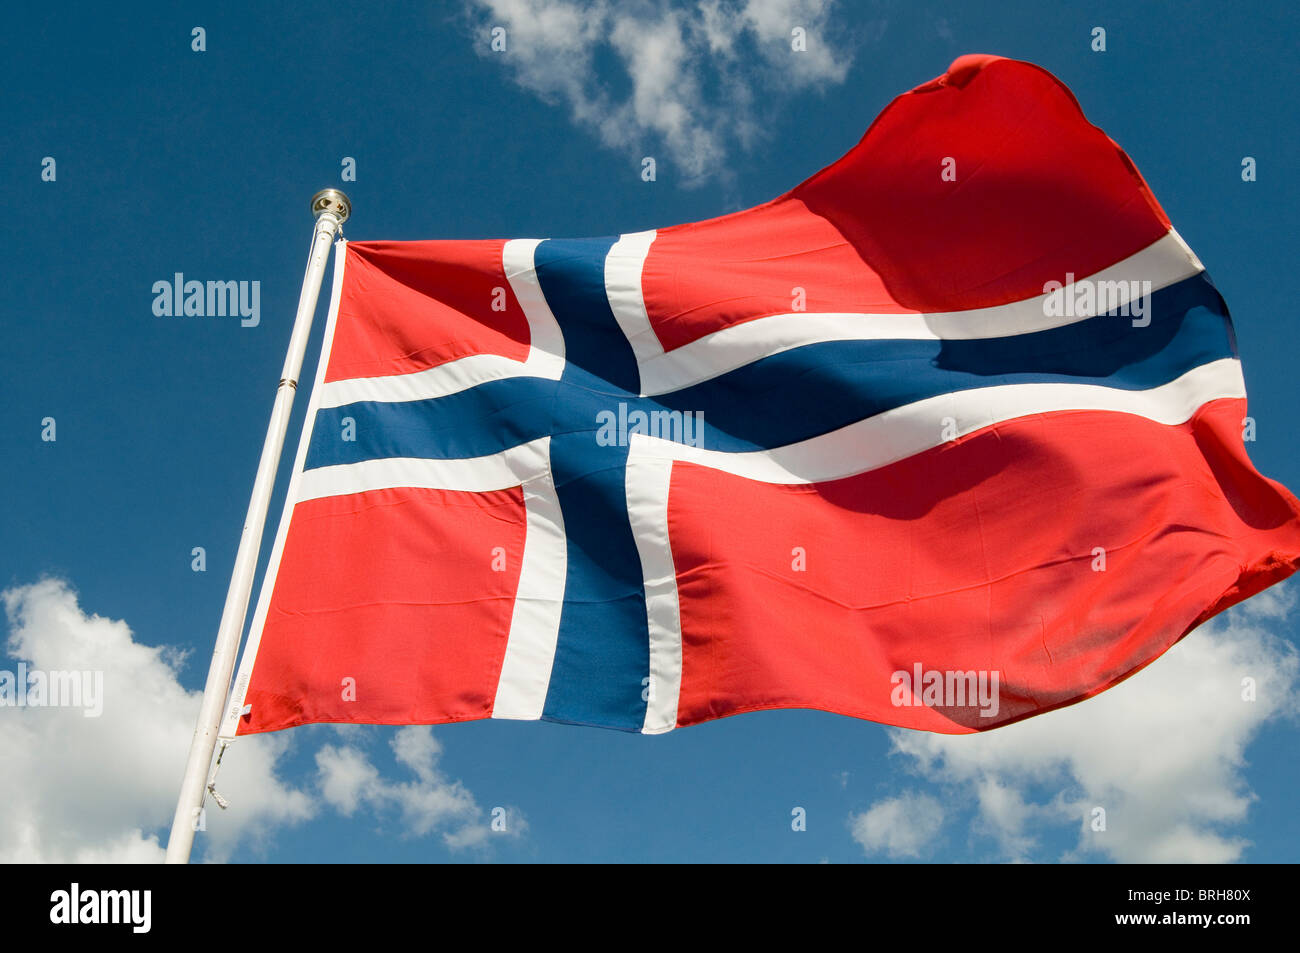 Norway Flag Norwegian Flags Pole Poles Flagpole Flagpoles Flutter Fluttering National Pride Symbol Nationality Stock Photo Alamy